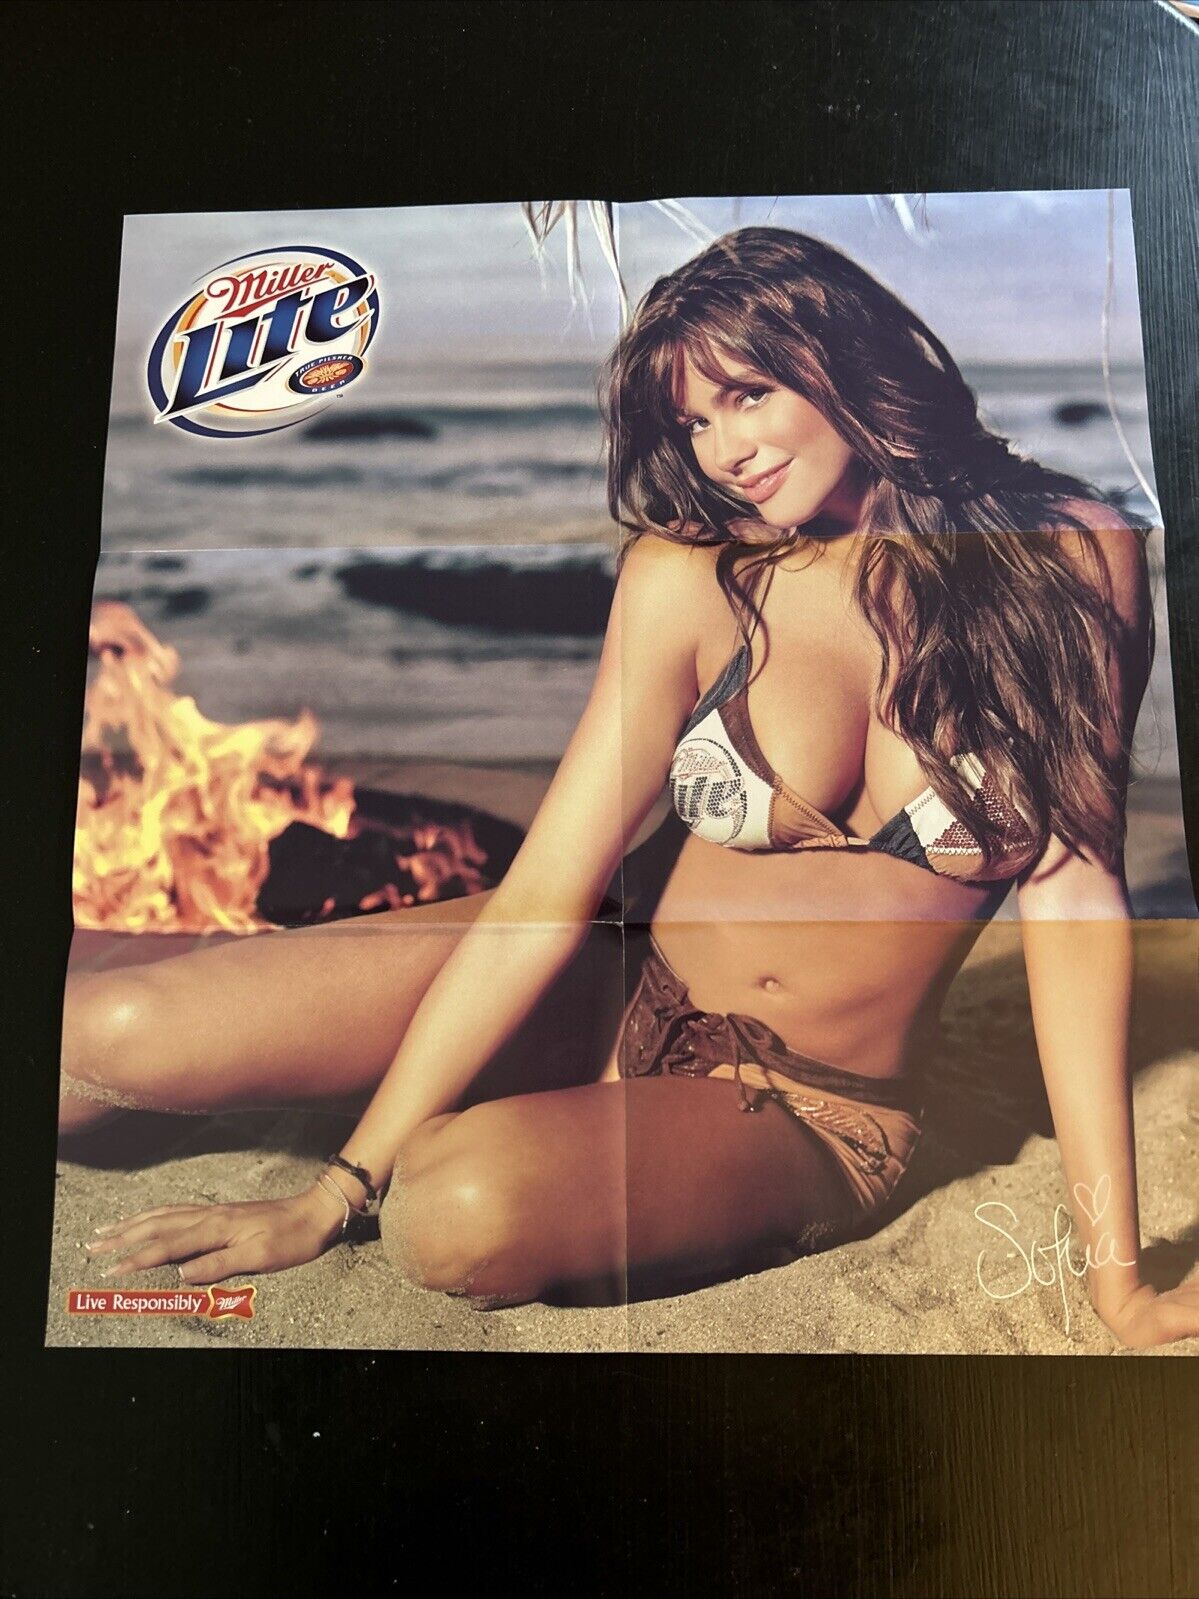 RARE 2003 Sports Illustrated Miller Lite Sofia Vergara Fold Out Poster 20”x22”